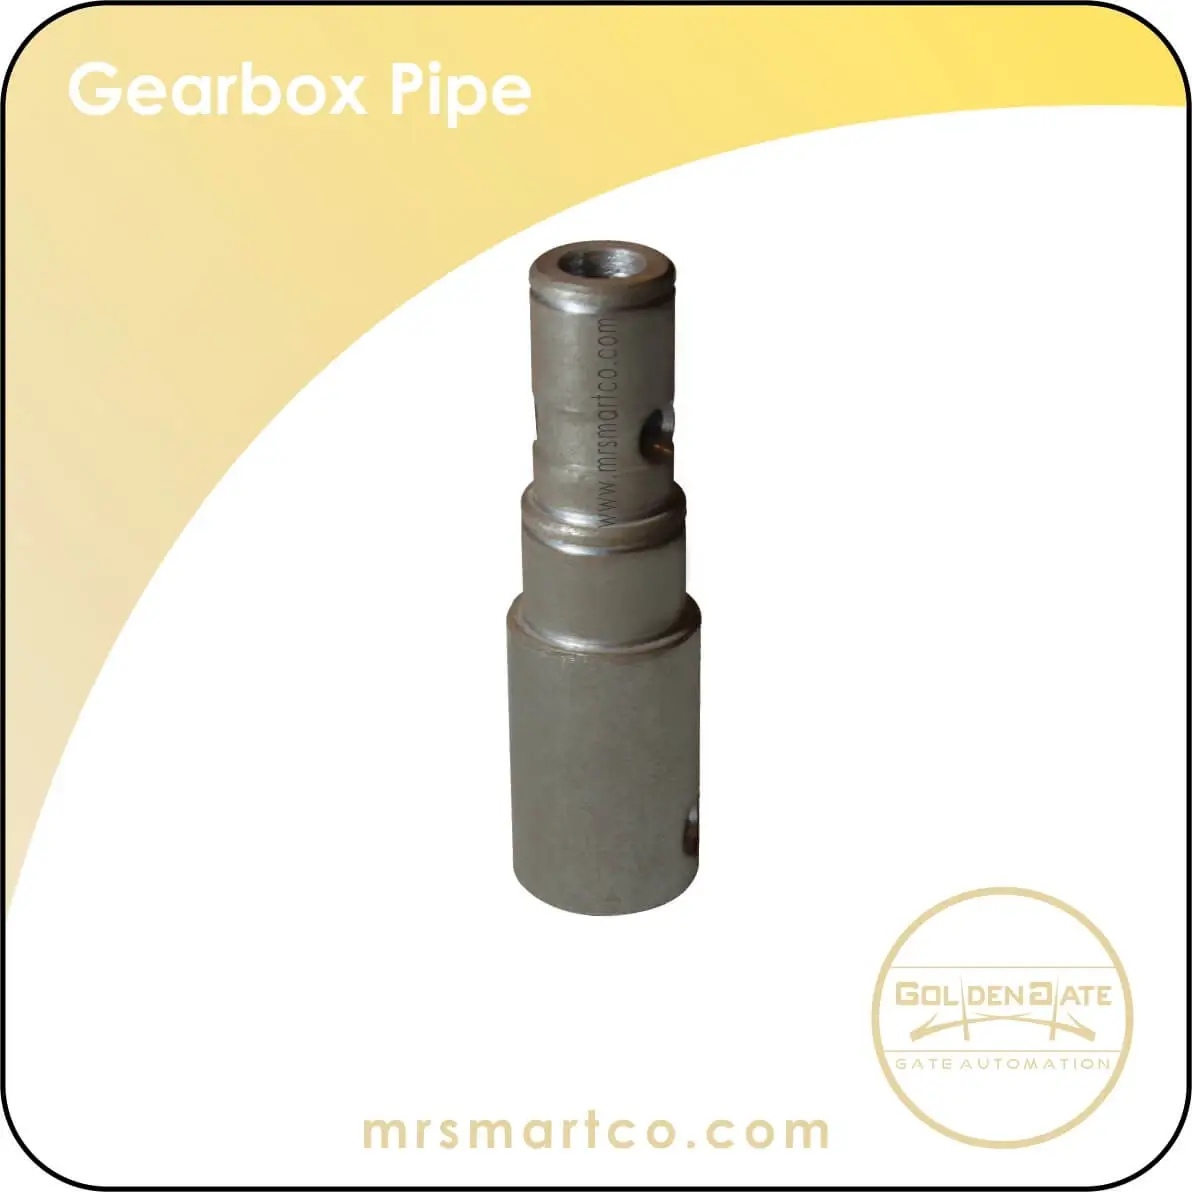 Gearbox pipe